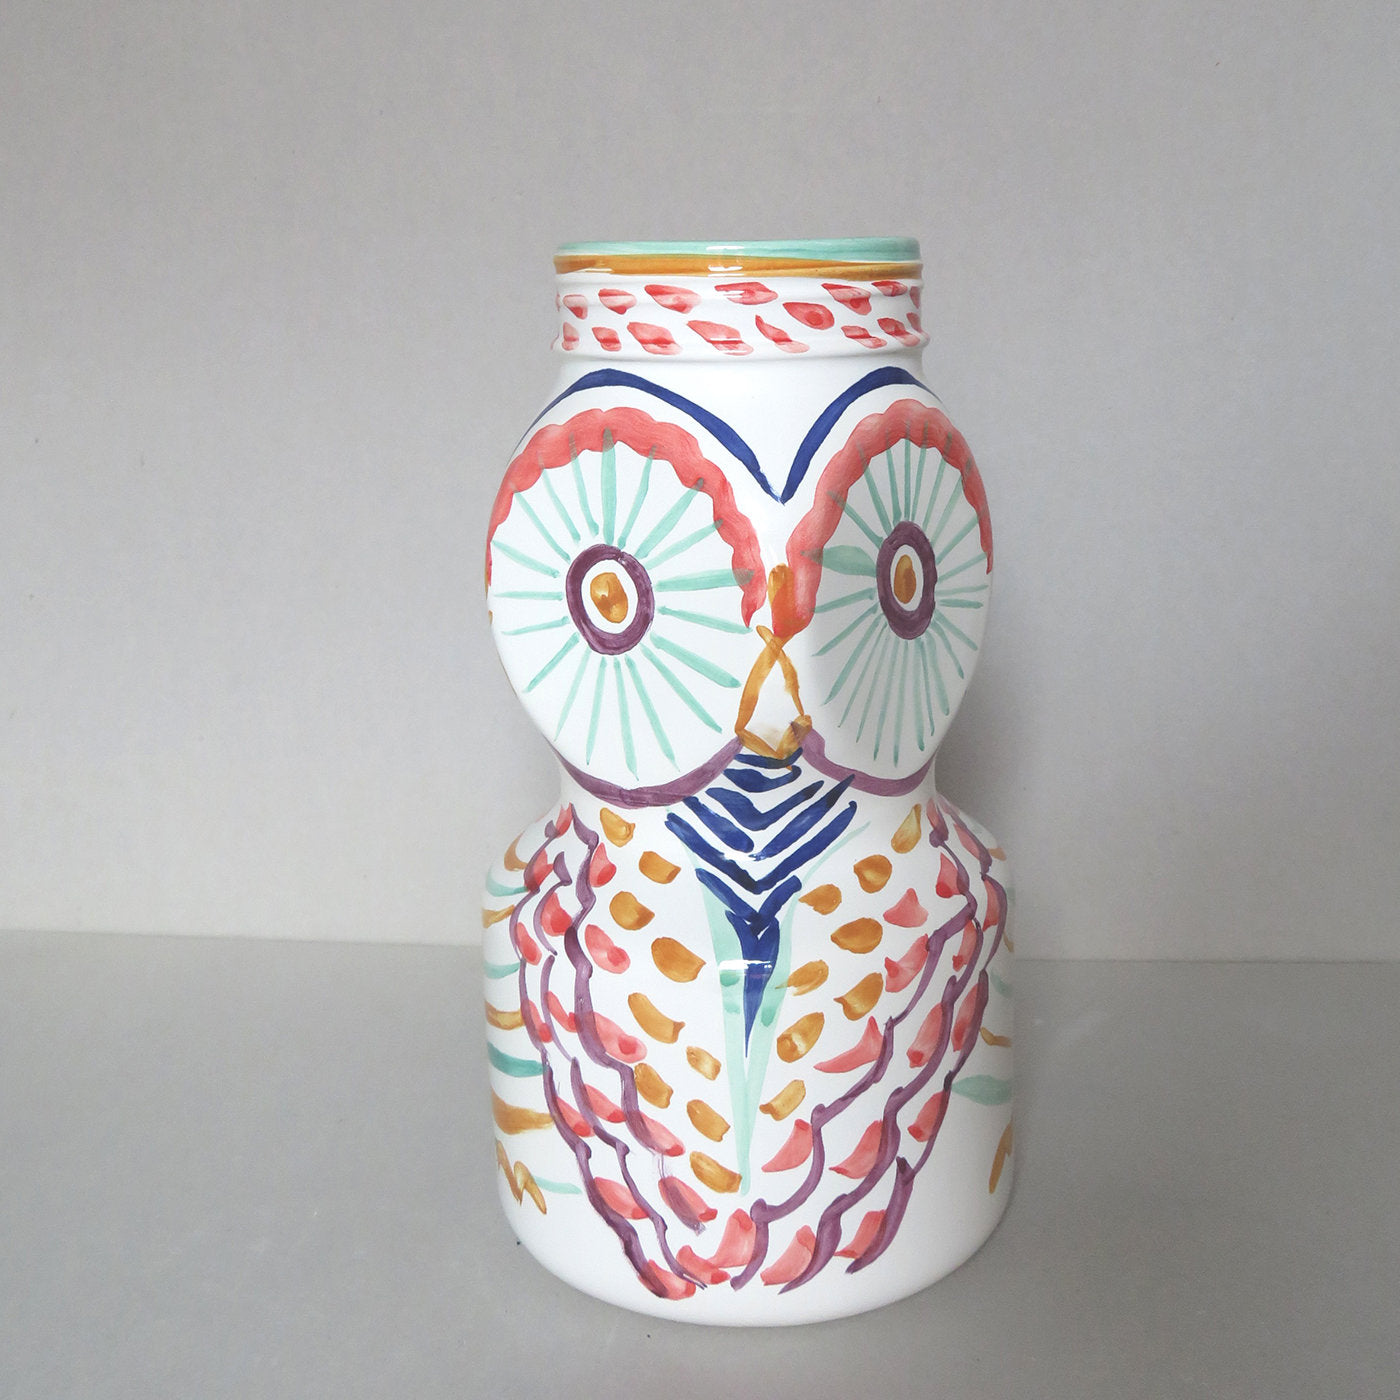 Owl Vase with Warm Colors - Alternative view 1